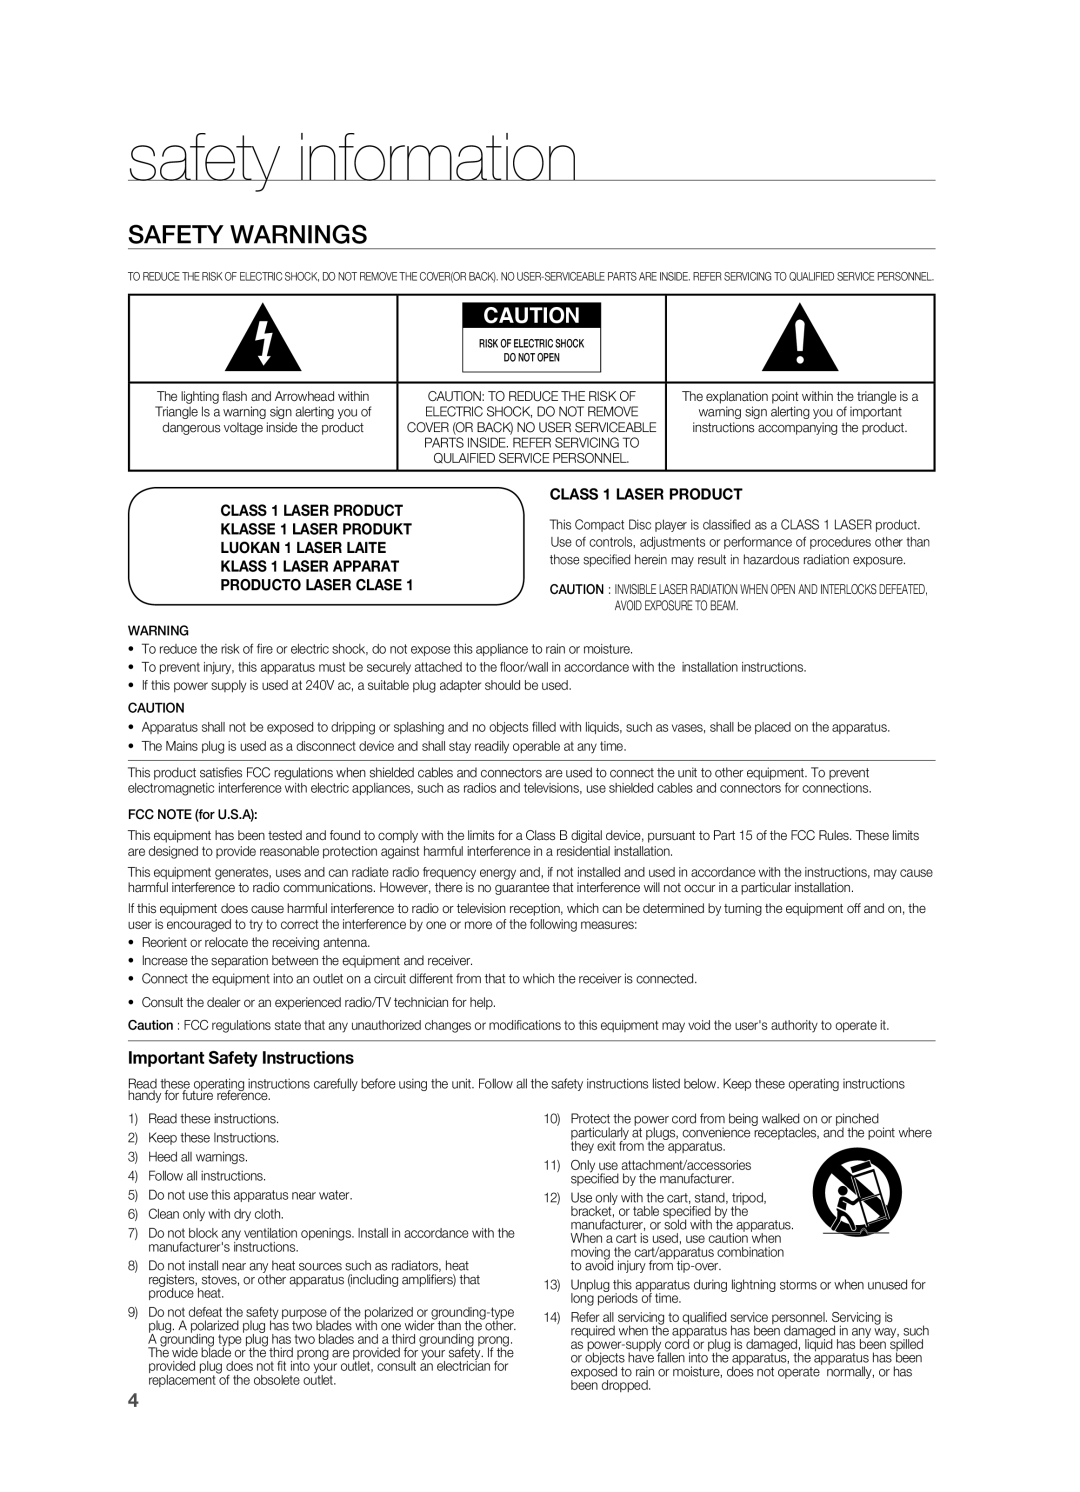 Samsung HT-Z510 manual safety information, Safety Warnings, Important Safety Instructions, Producto Laser Clase 